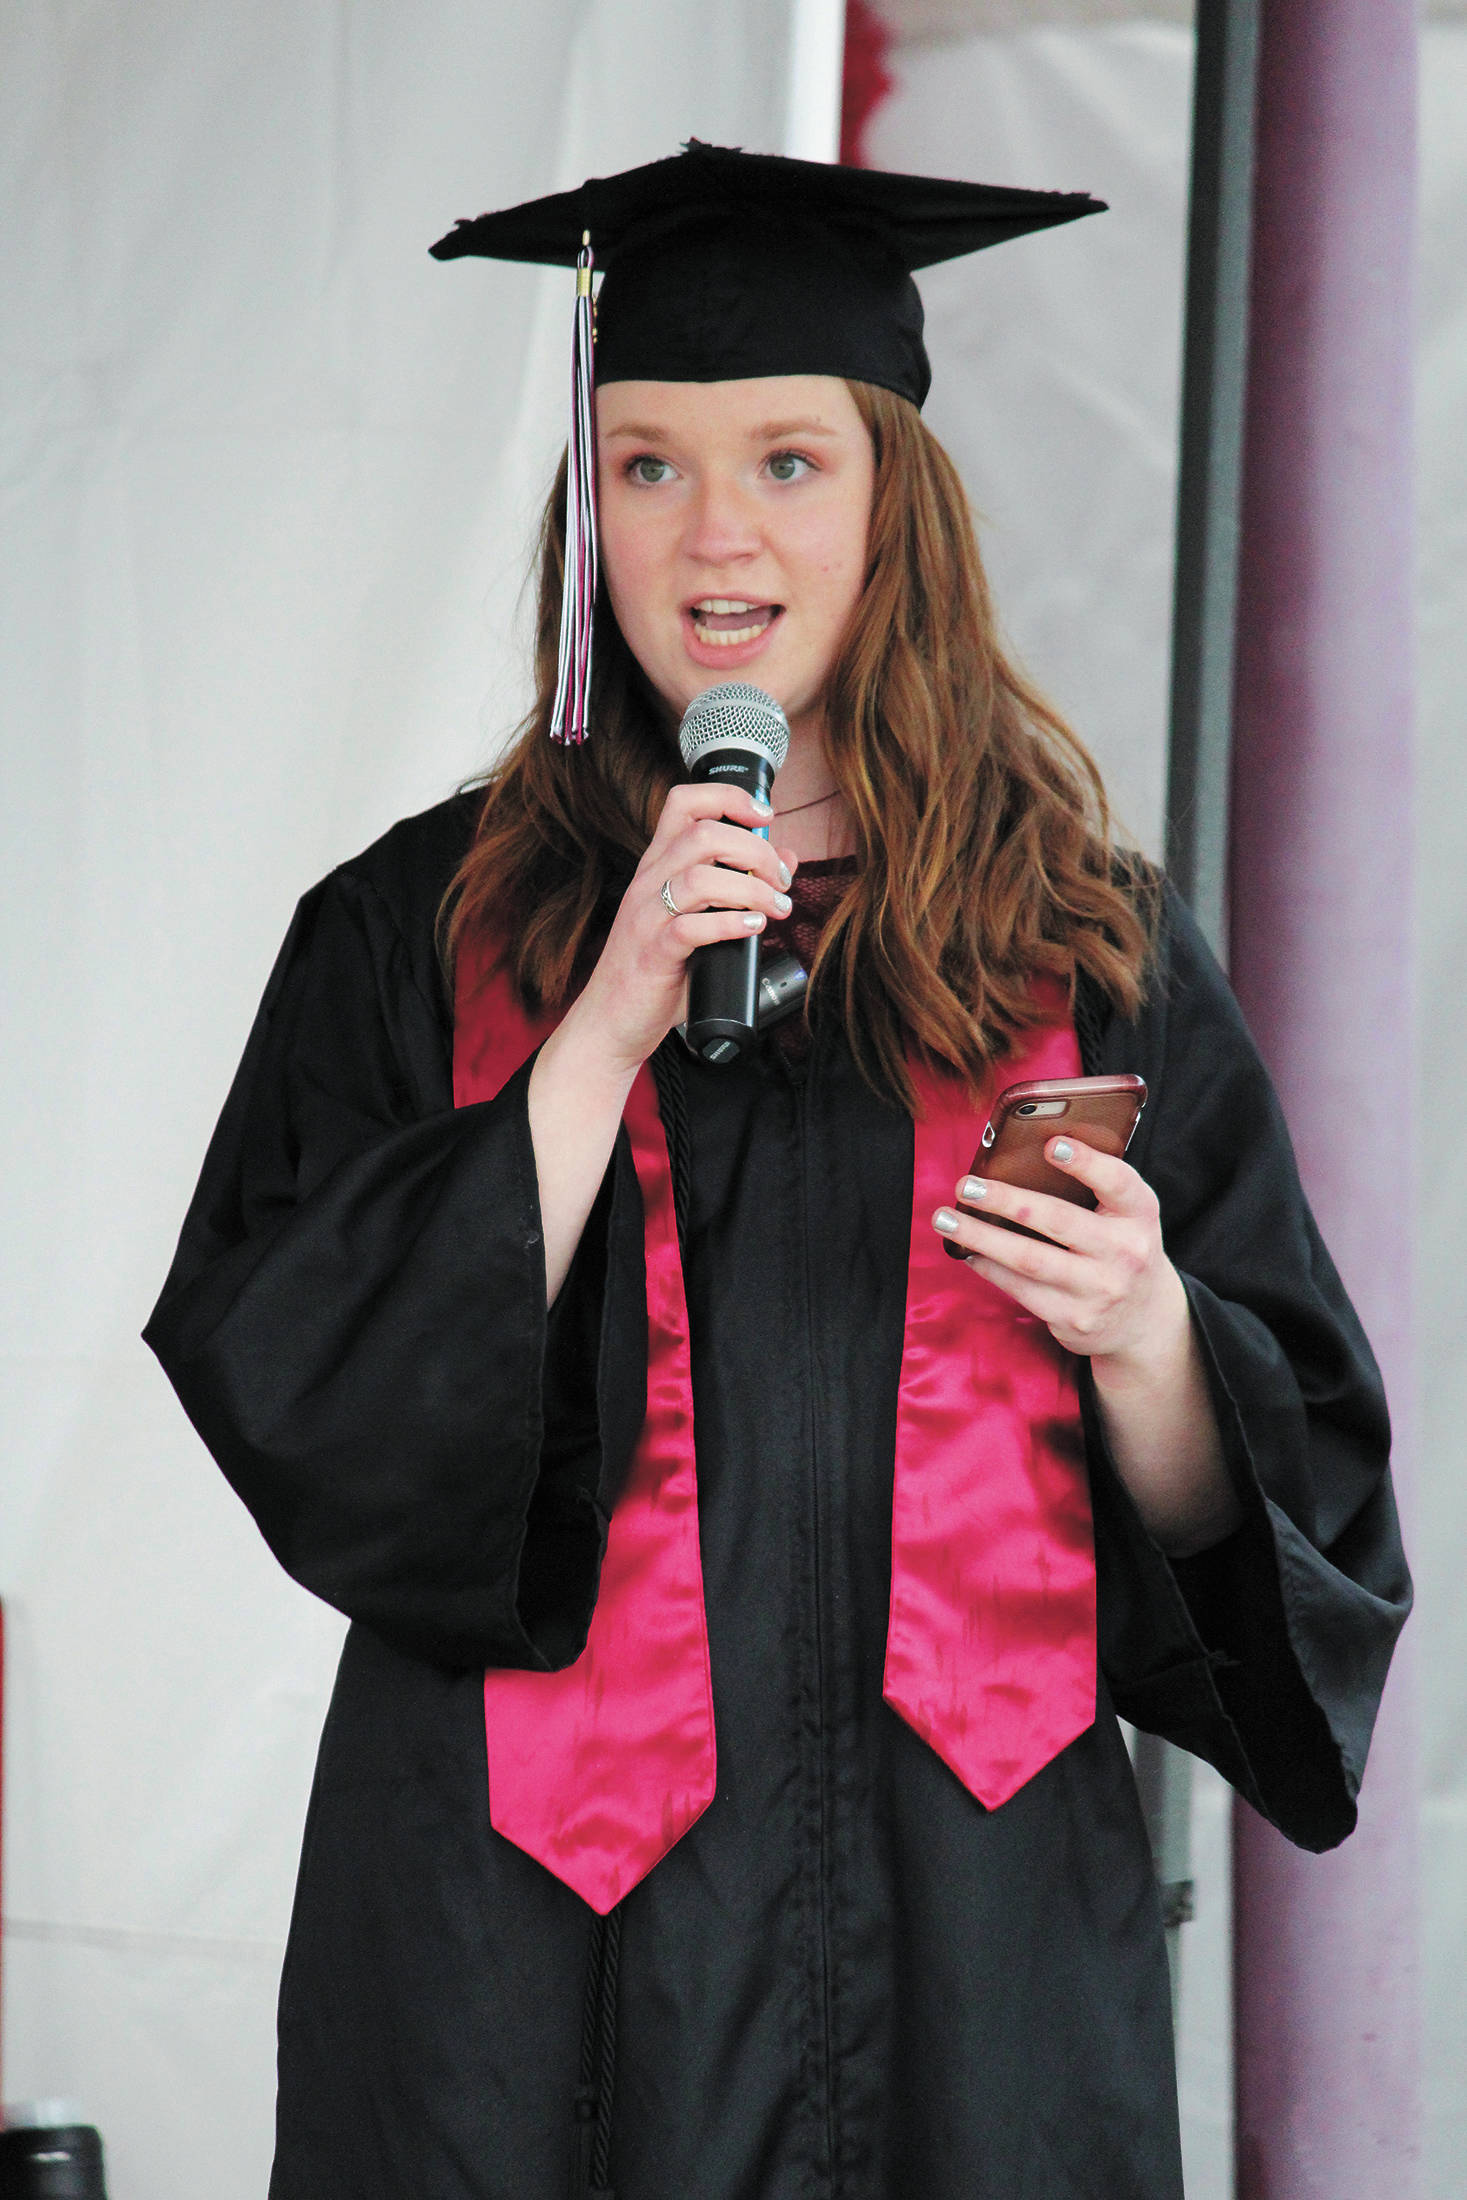 Nikolaevsk valedictorian Sophia Klaich addresses her fellow graduates during a Tuesday, May 19, 2020 commencement ceremony at the school in Nikolaevsk, Alaska. (Photo by Megan Pacer/Homer News)